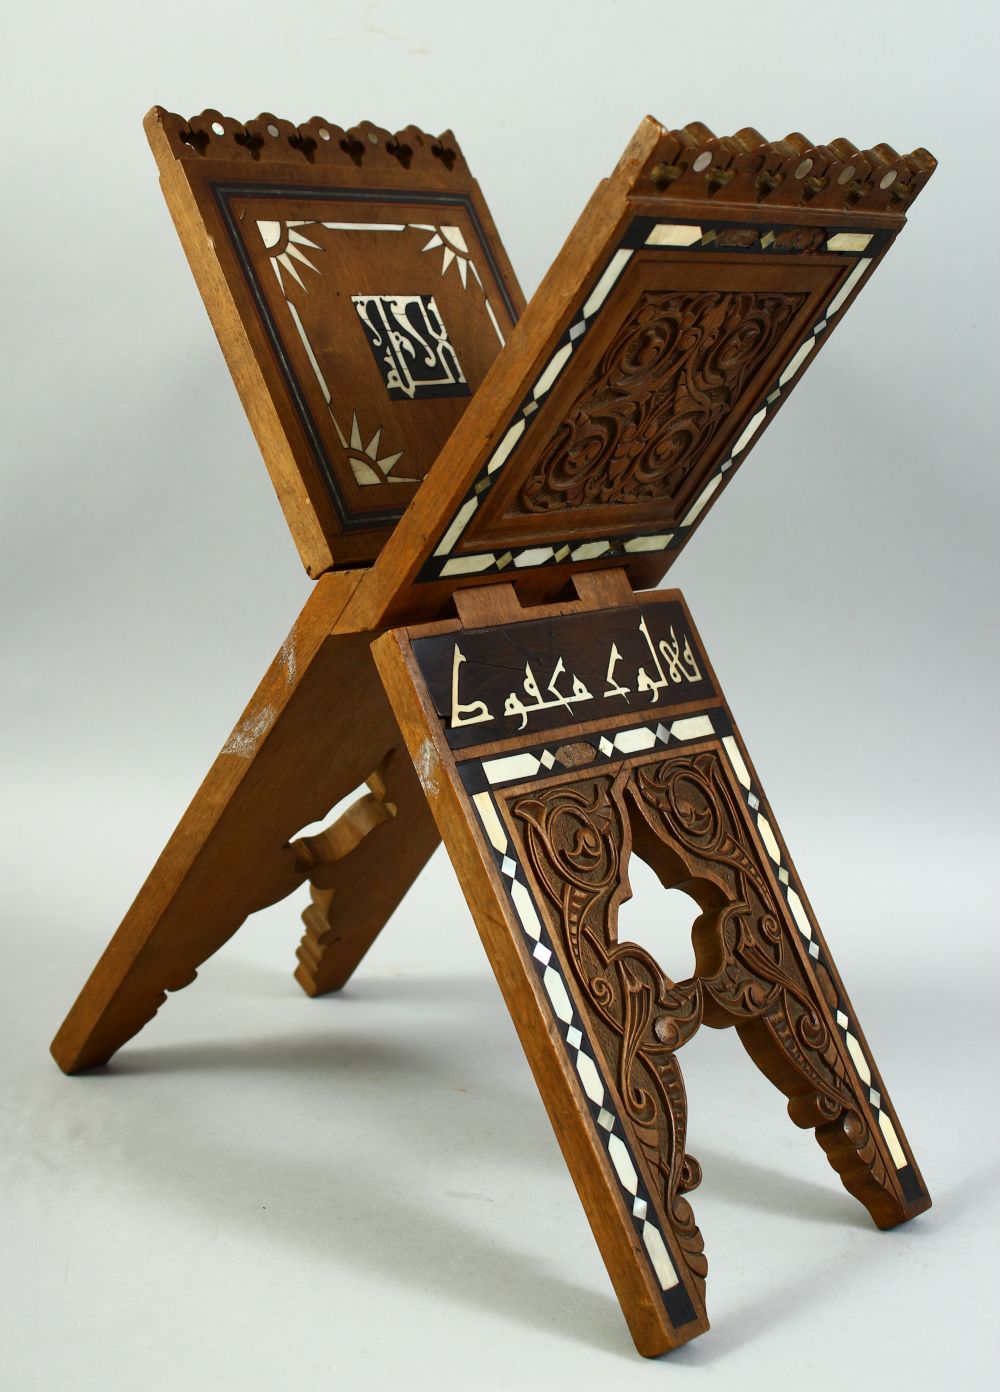 A FINE 19TH CENTURY ISLAMIC OTTOMAN BONE AND MOTHER OF PEARL INLAID QURAN BOOK STAND, carved with